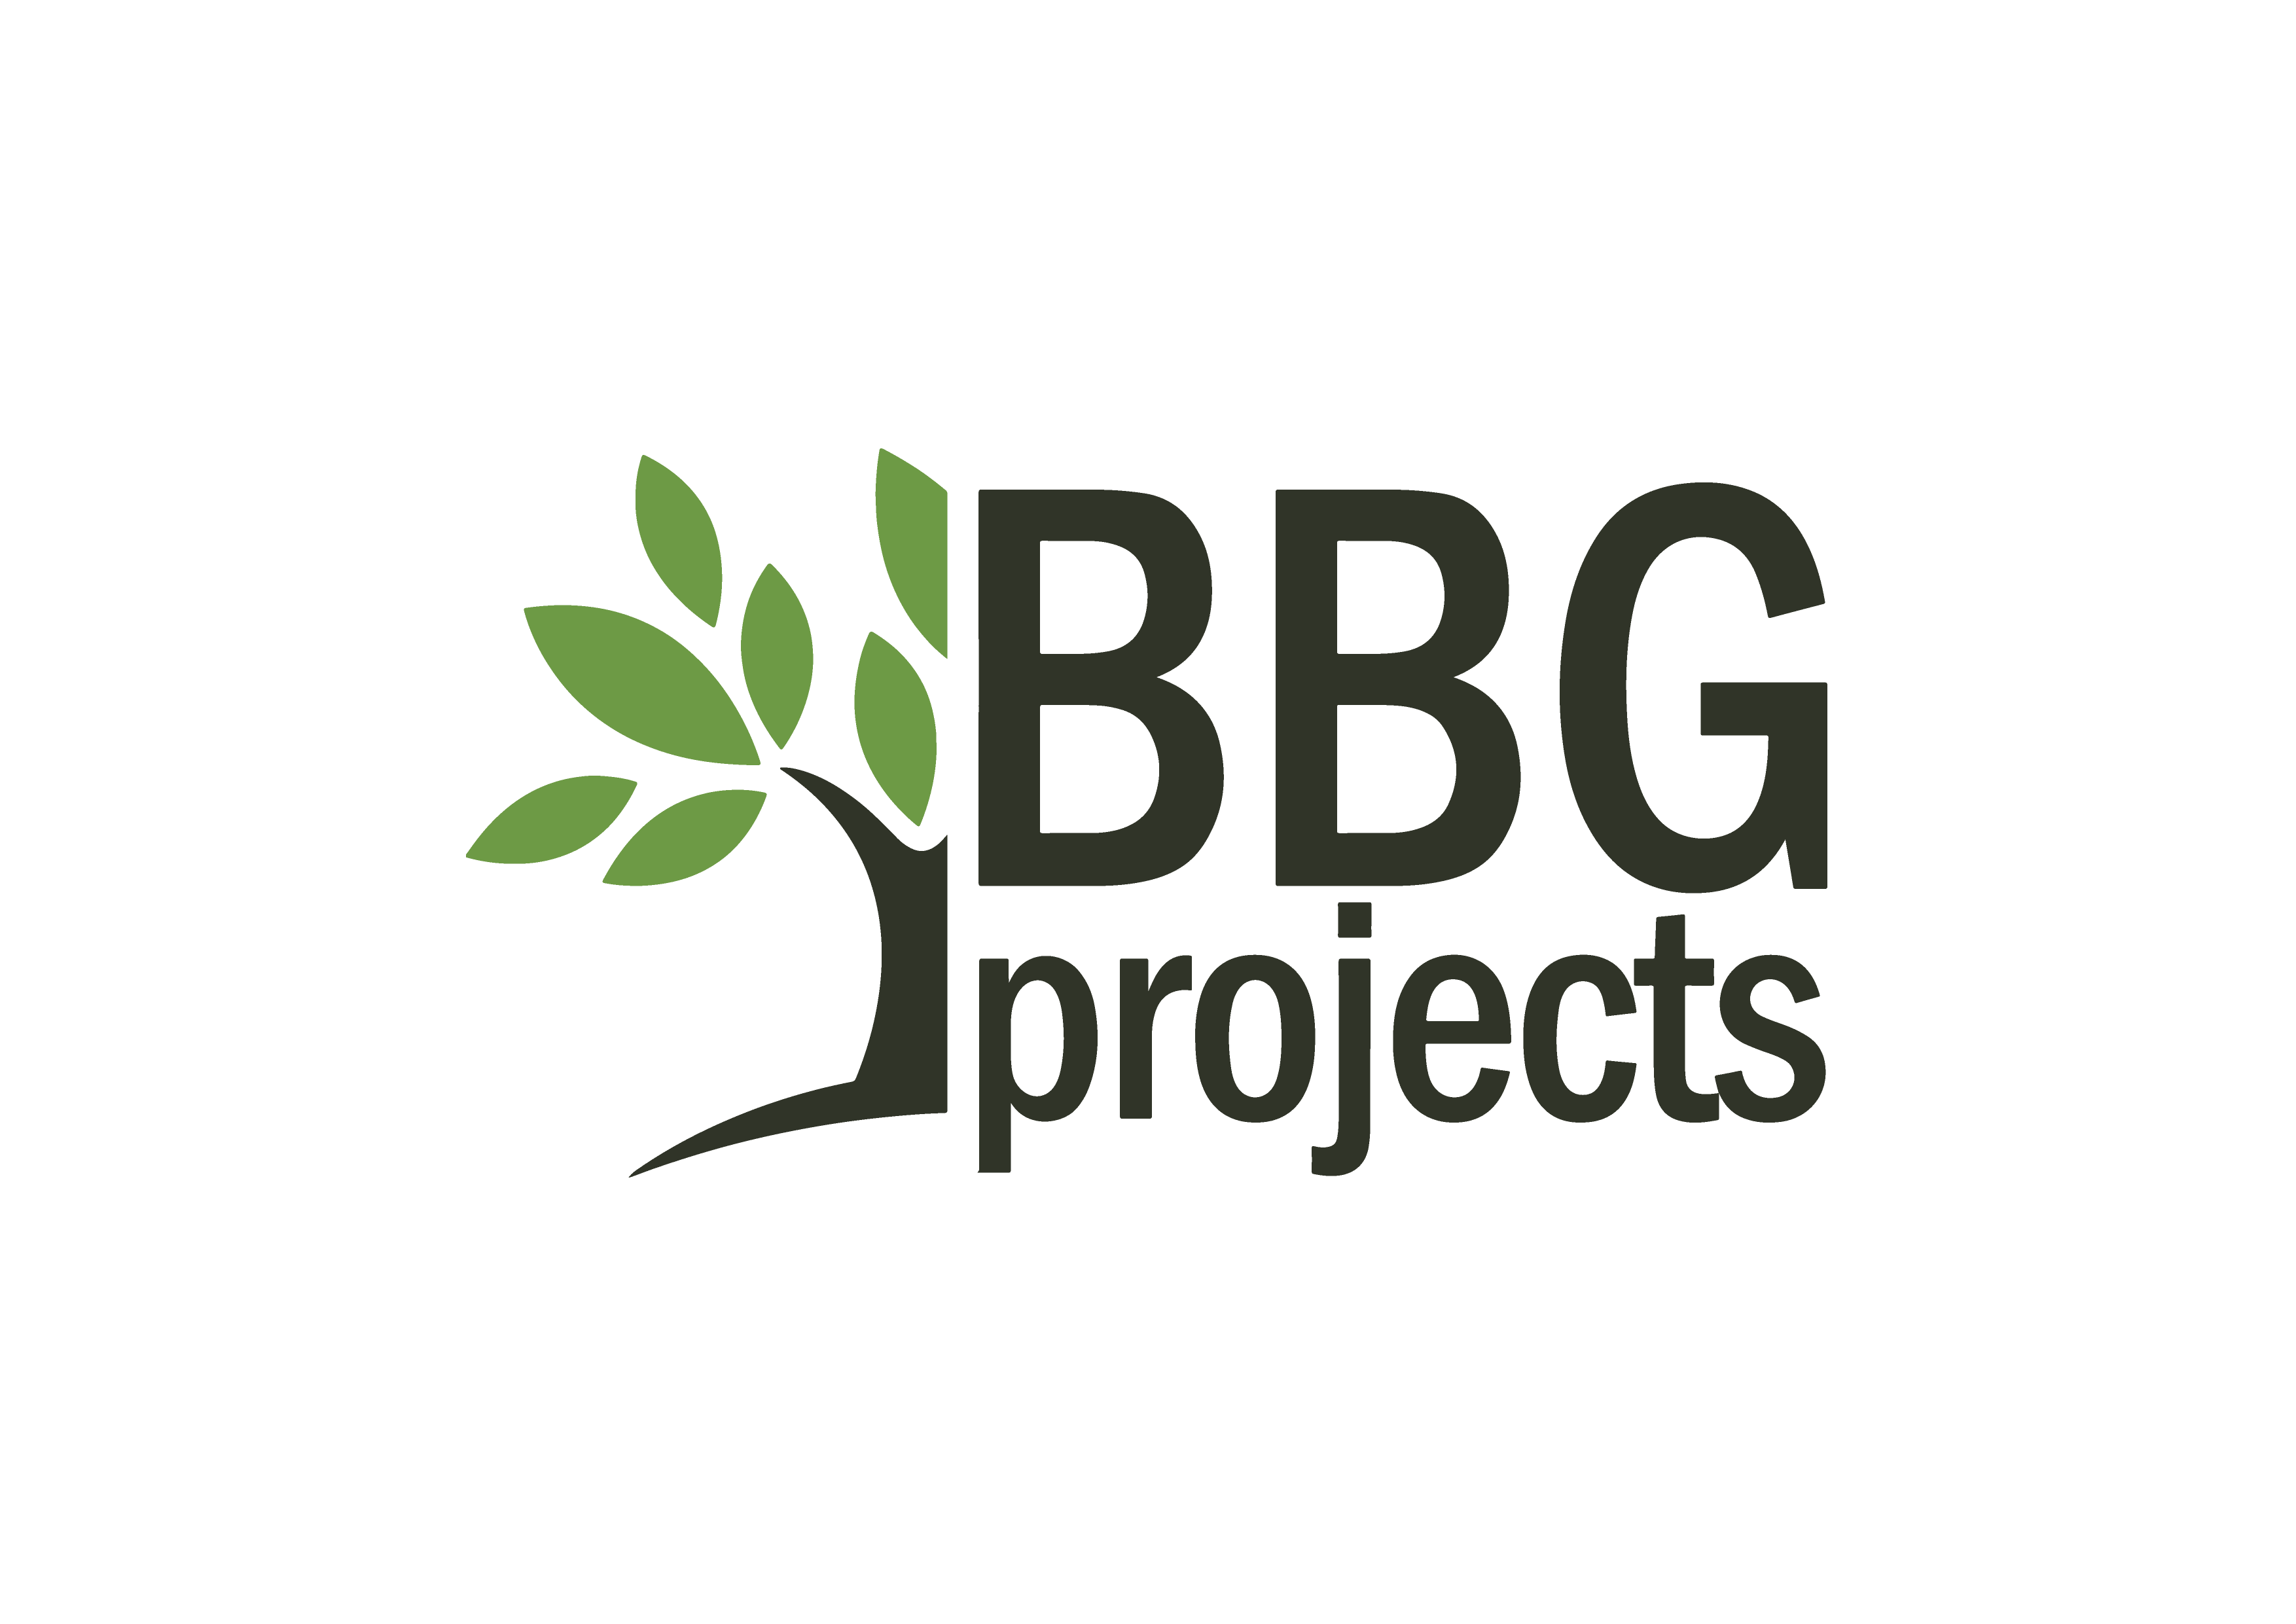 BBG projects